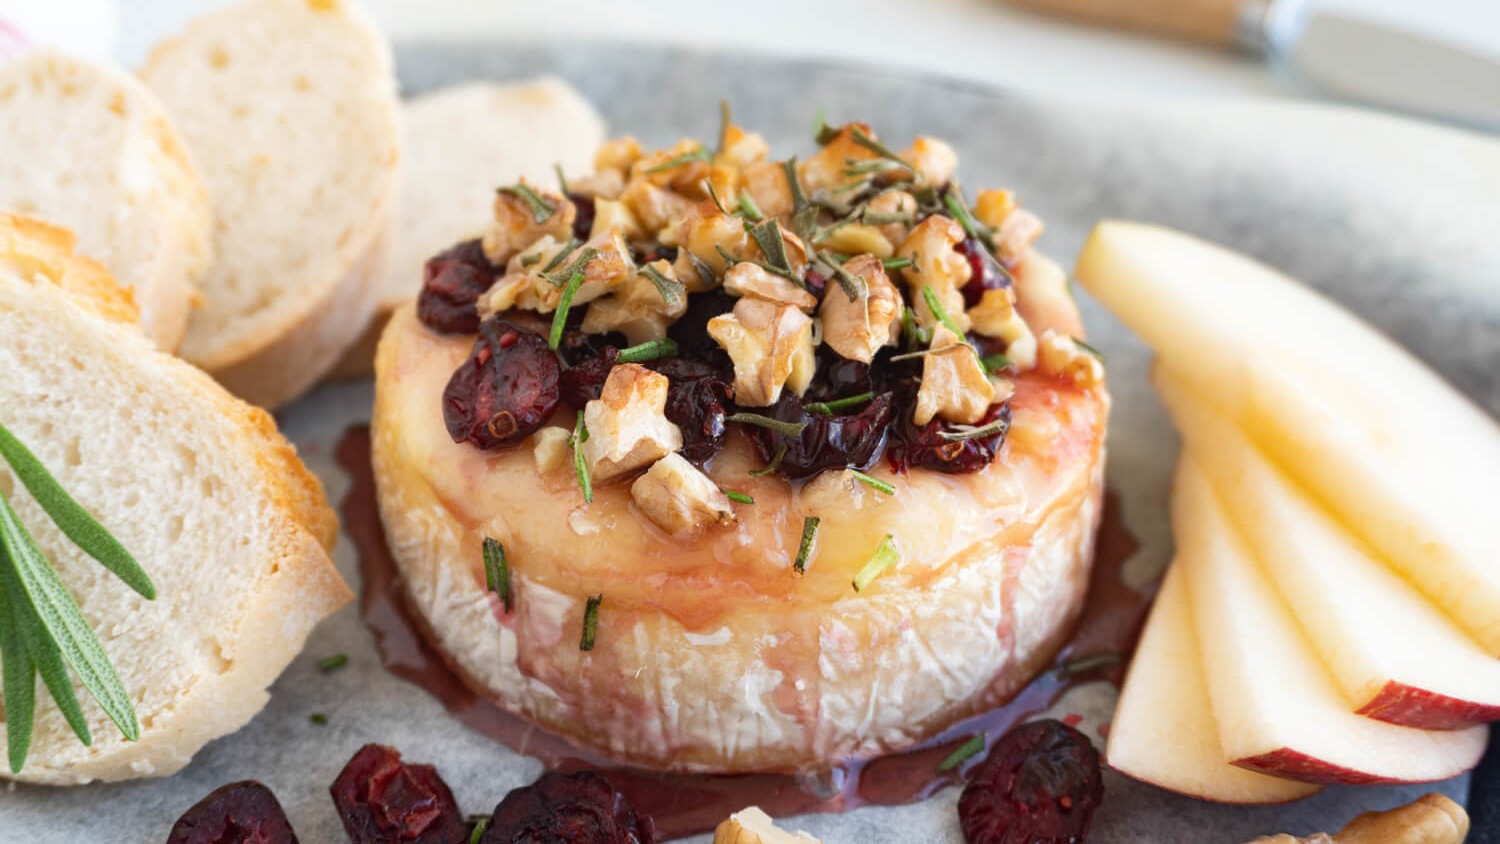 Image of Baked Brie with Cranberries and Walnuts